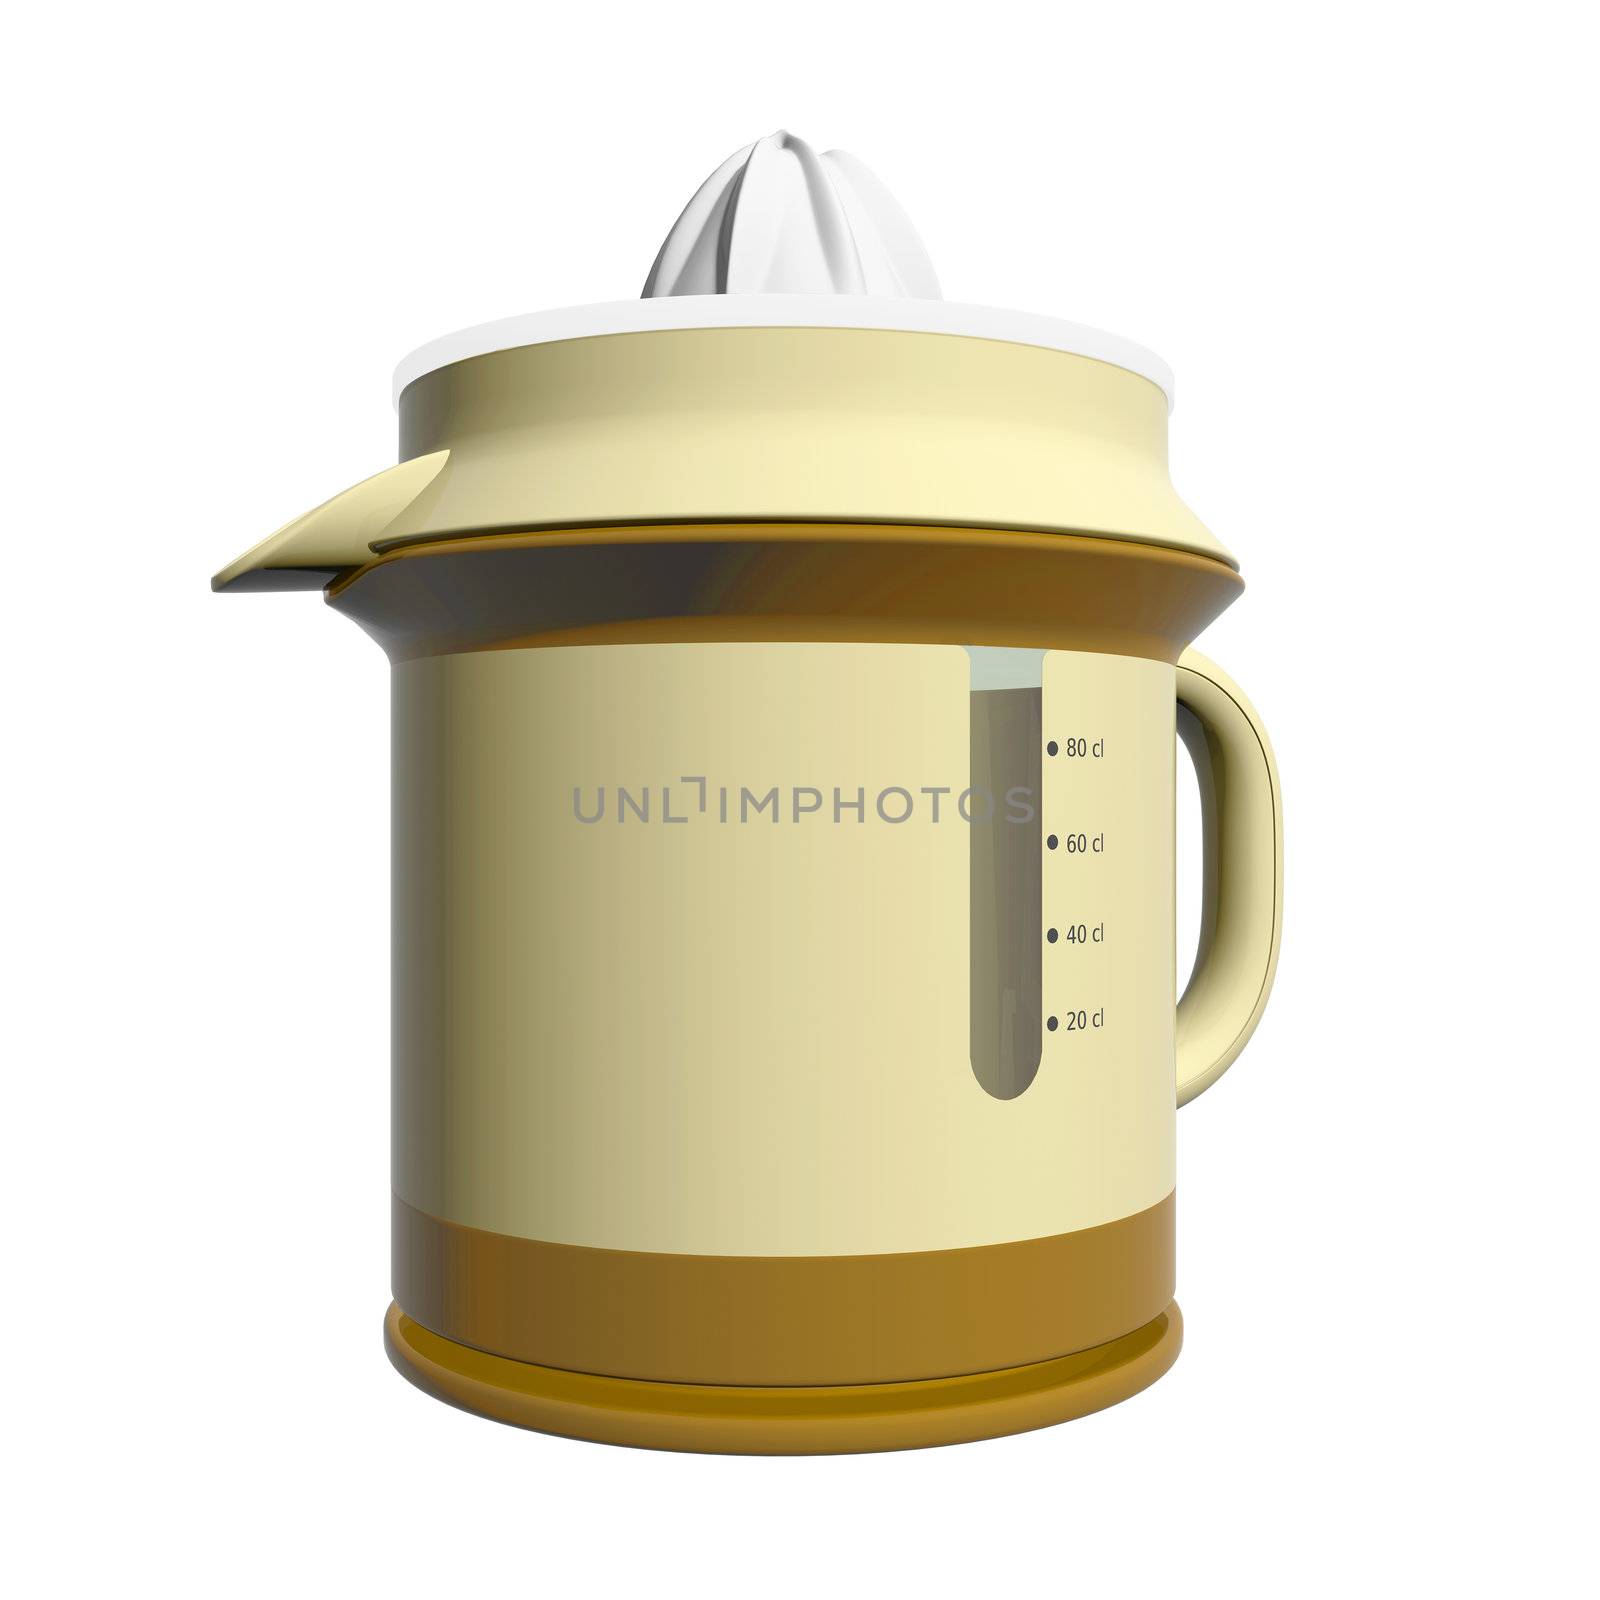 Combination juicer and pitcher, brown and yellow, plastic, 3D illustration, isolated against a white background